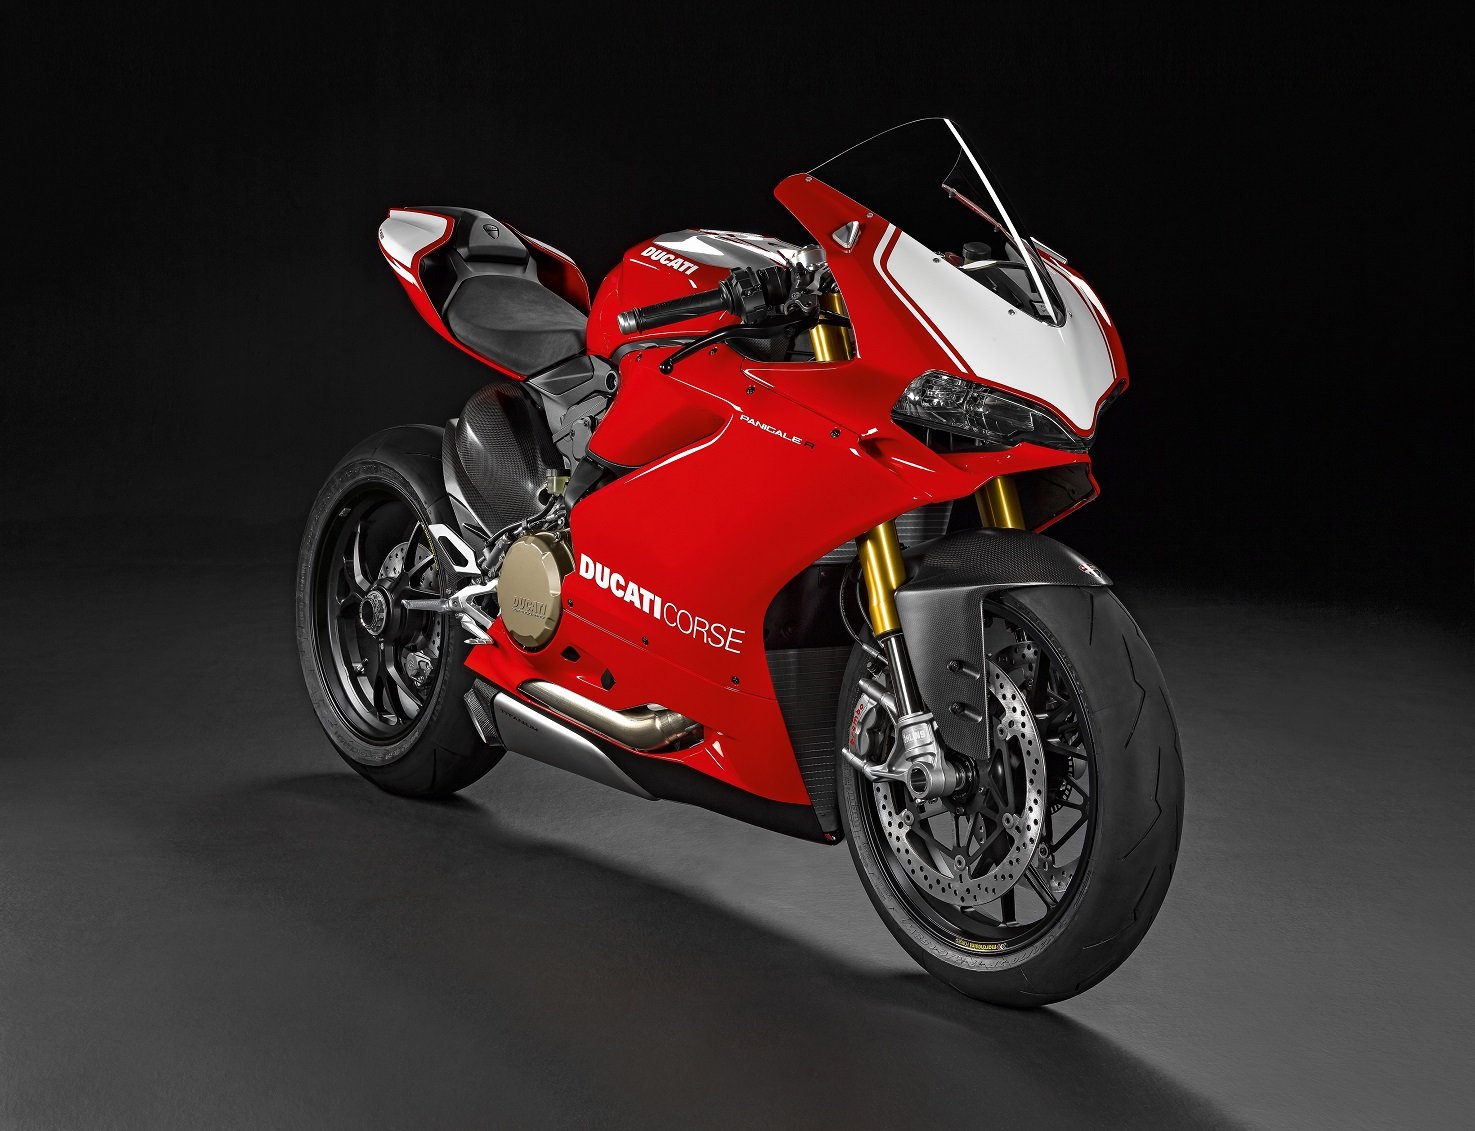 ducati, Panigale r, Motorcycles, 2012 Wallpaper